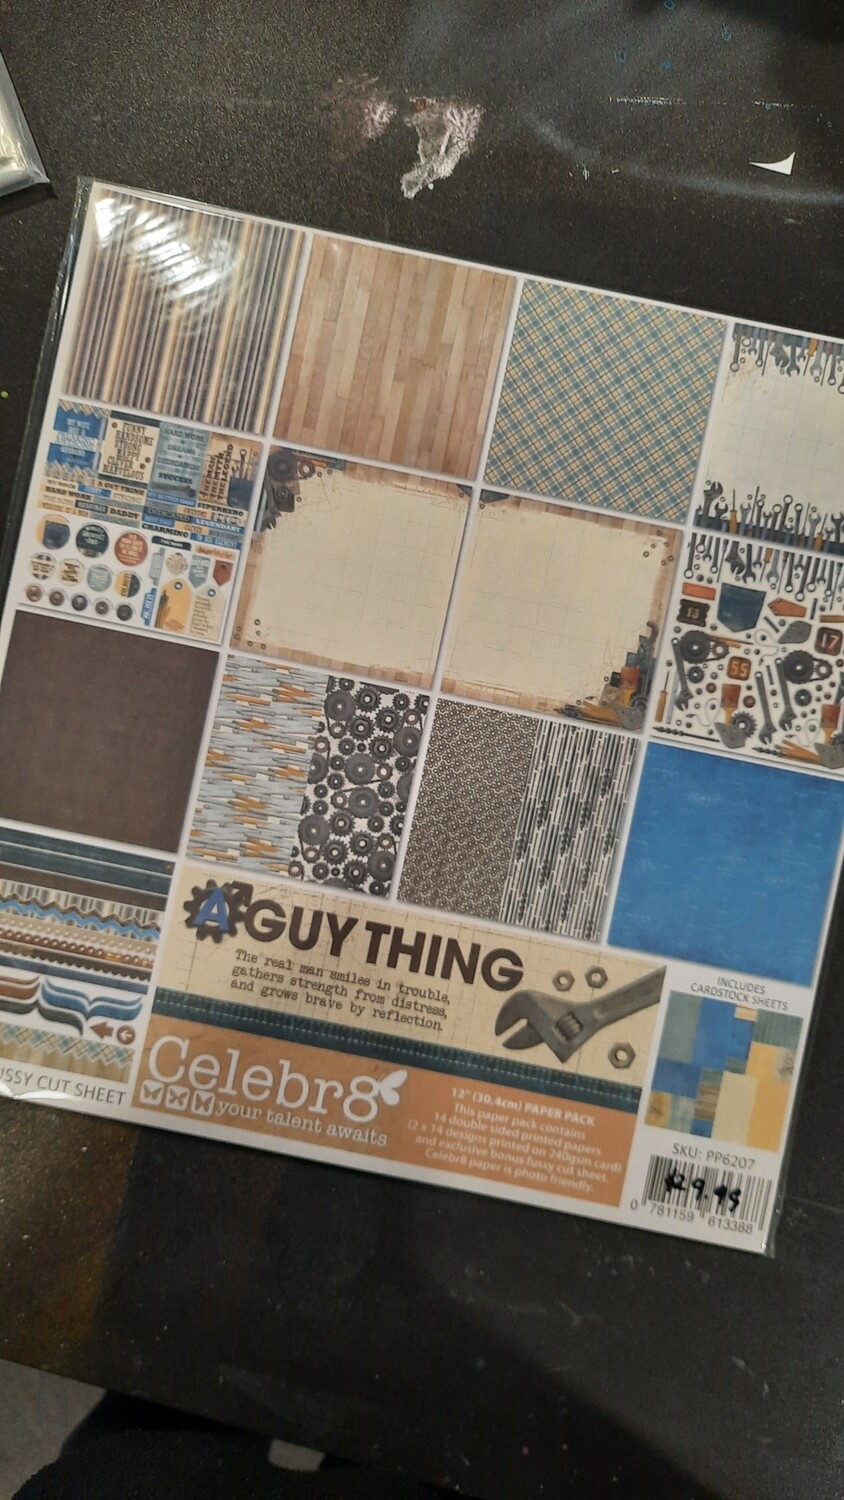 Celebr8 A guy thing paper pack